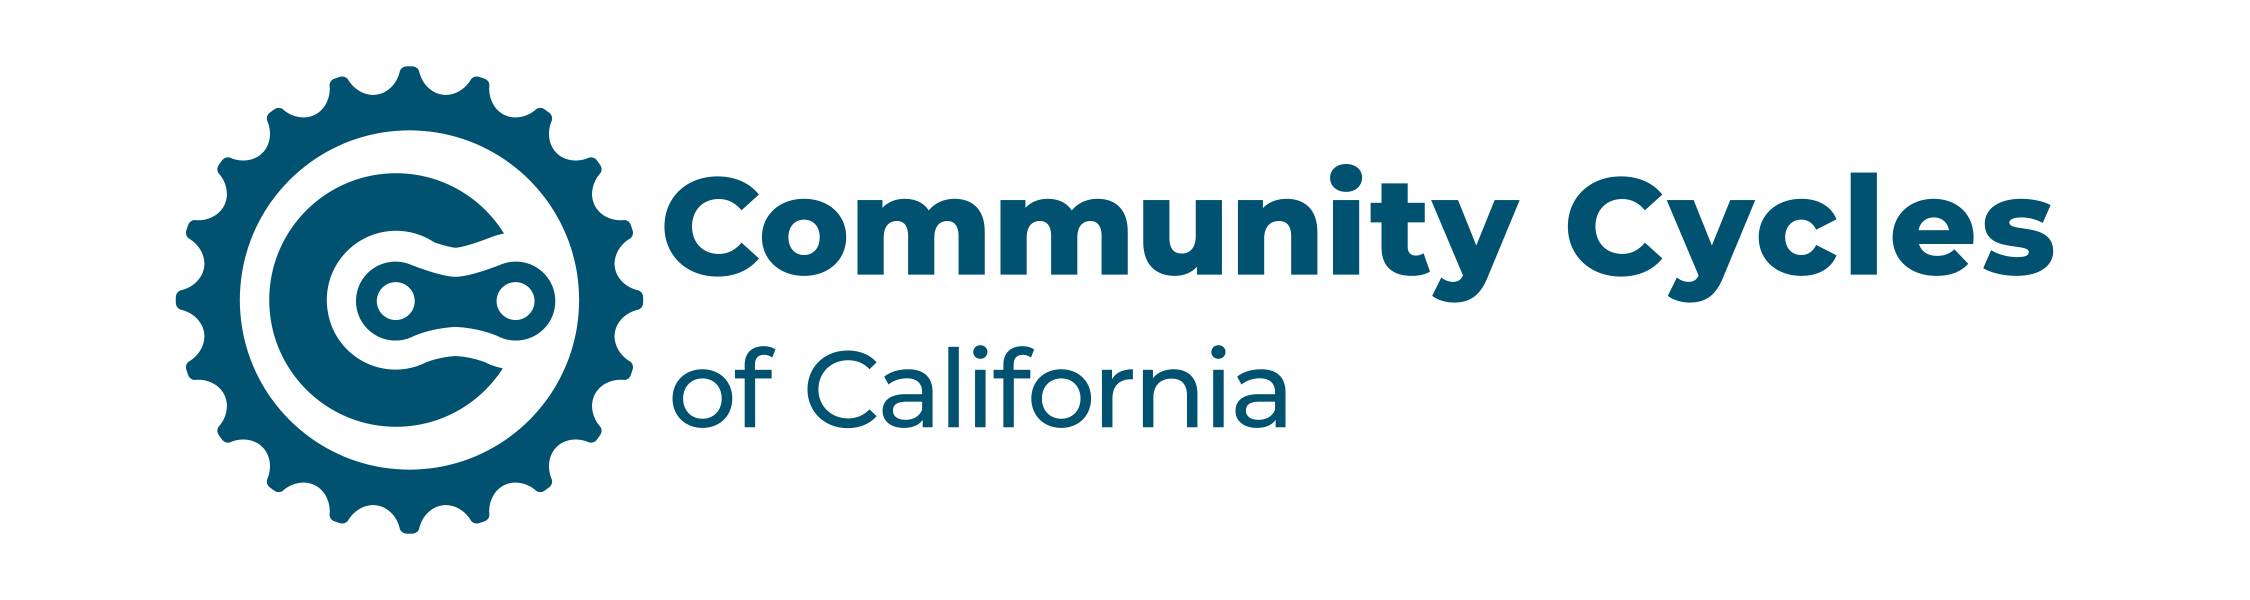 Community Cycles of California